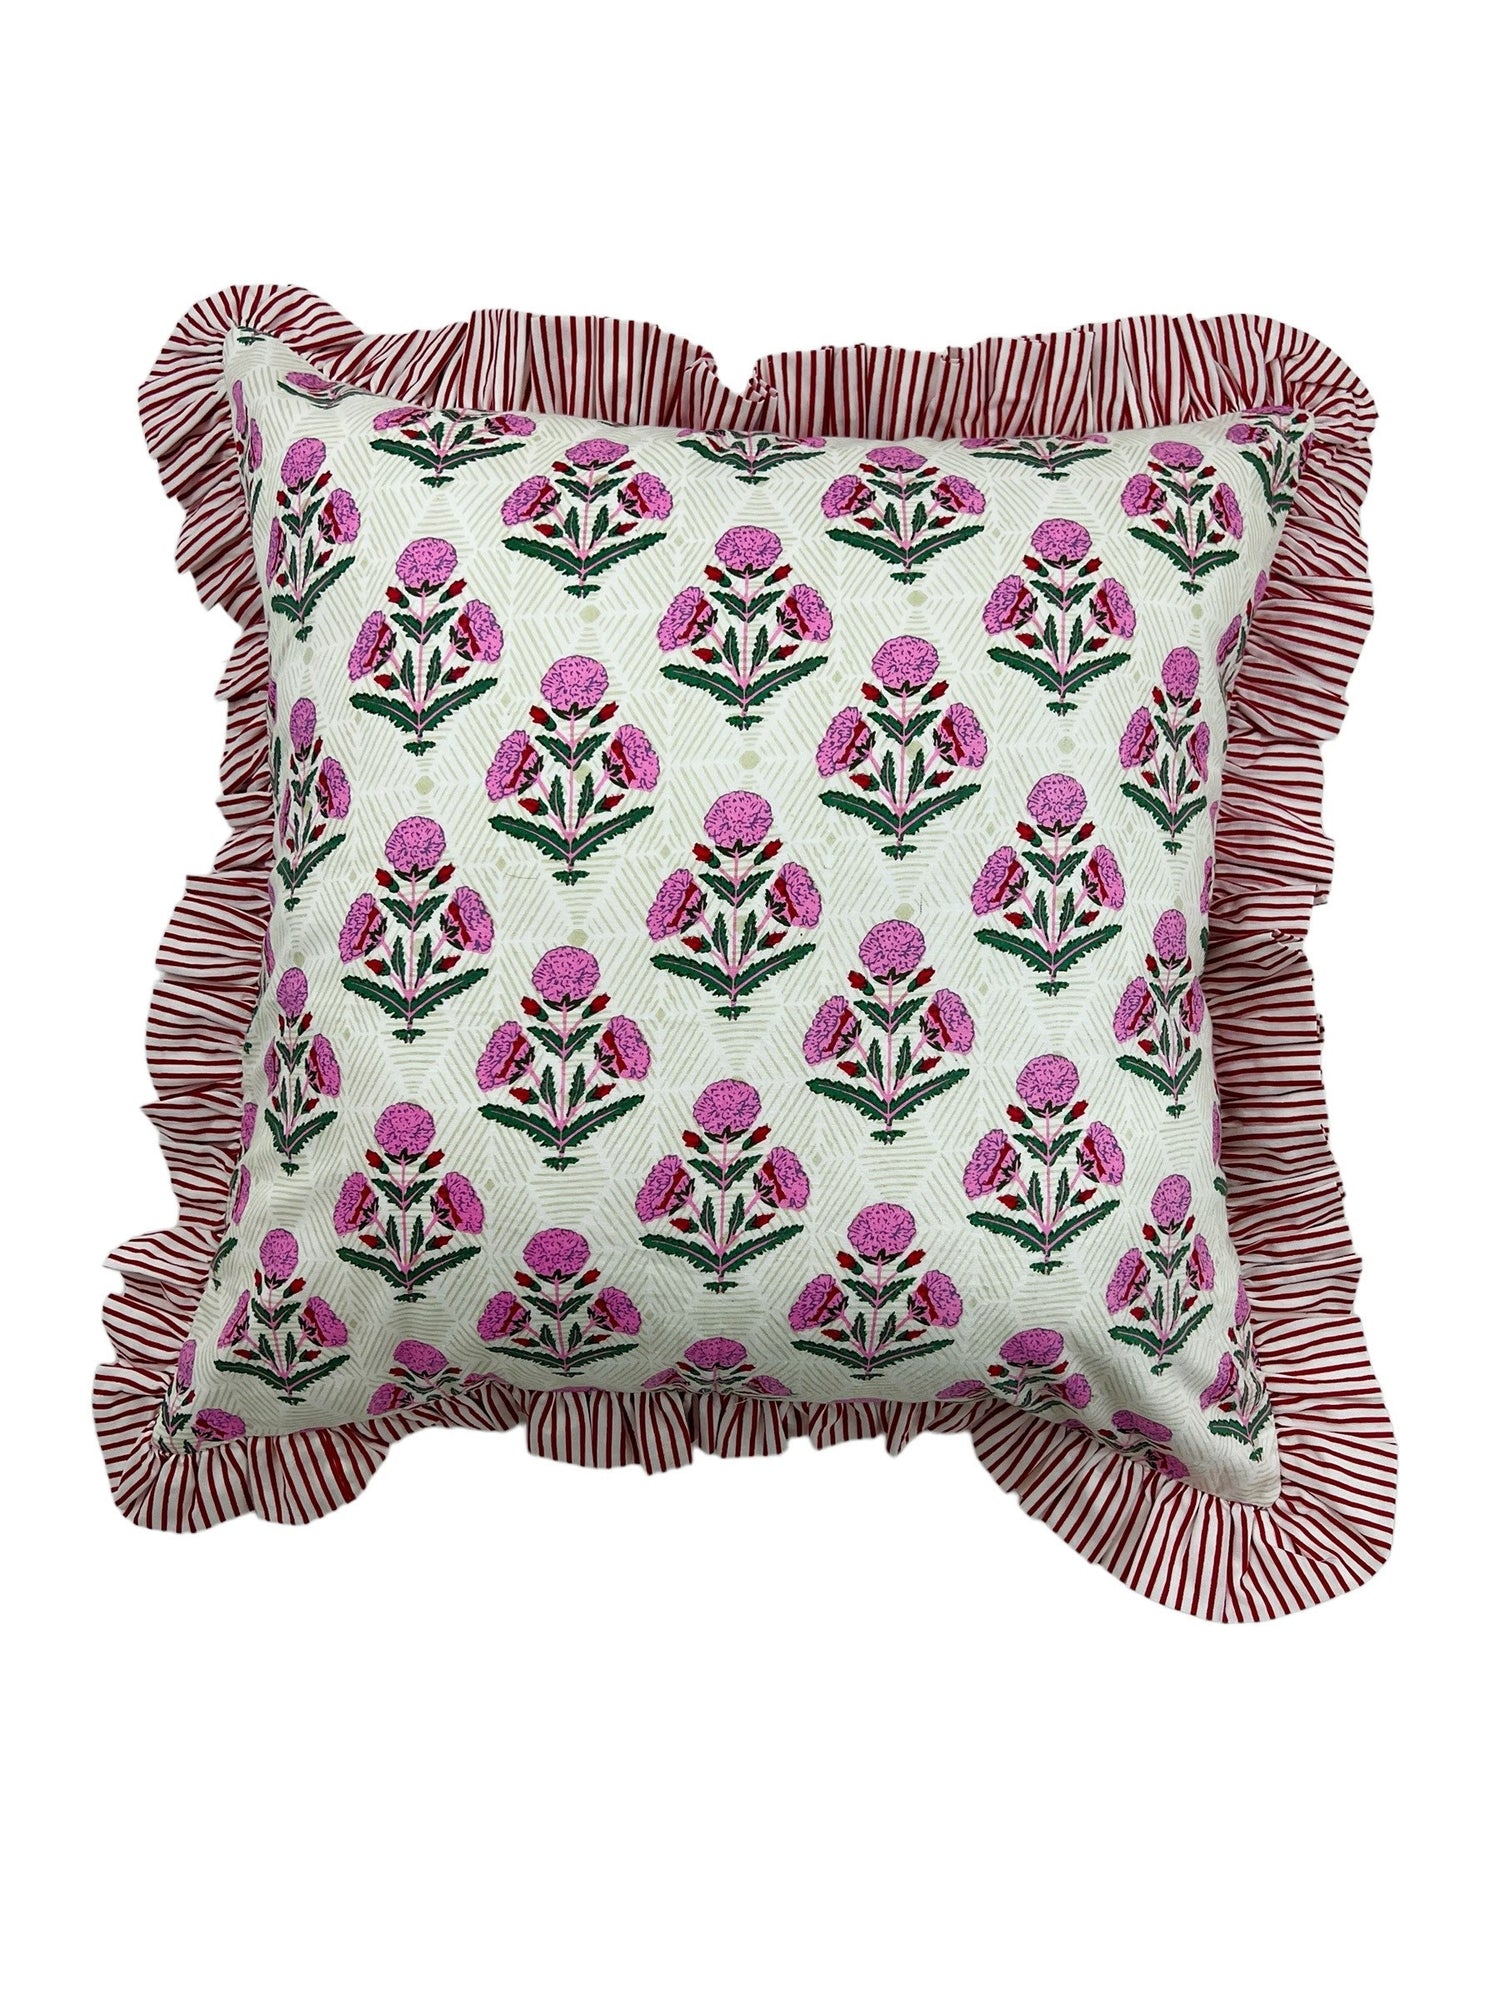 Pink and red floral block print ruffle pillow